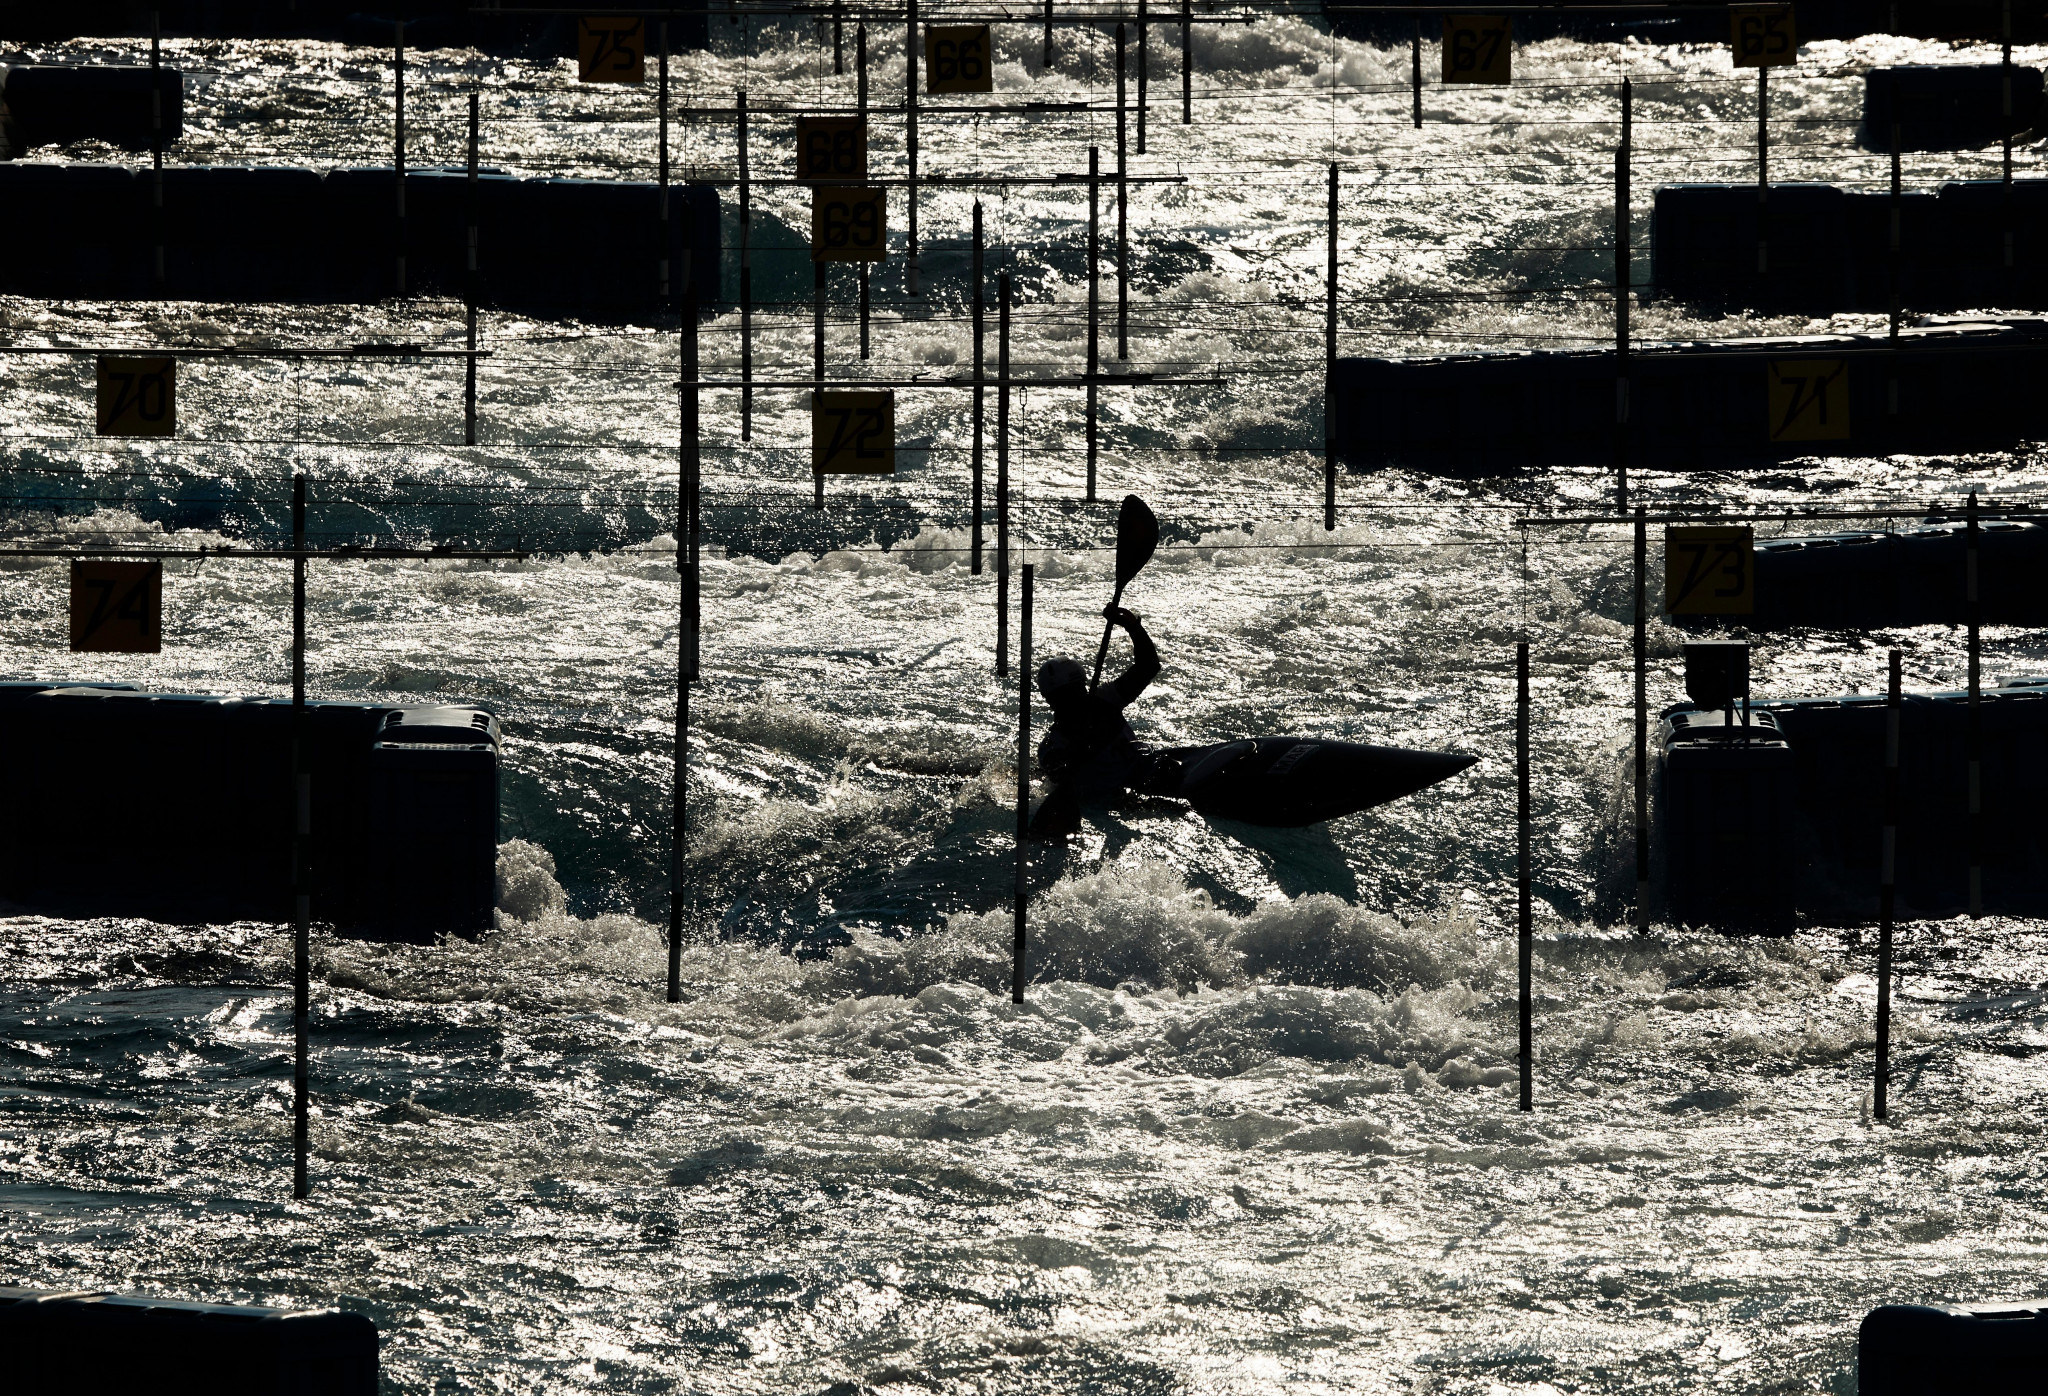 A canoe slalom athlete takes to the water in preparation for the start of the Games ©Getty Images